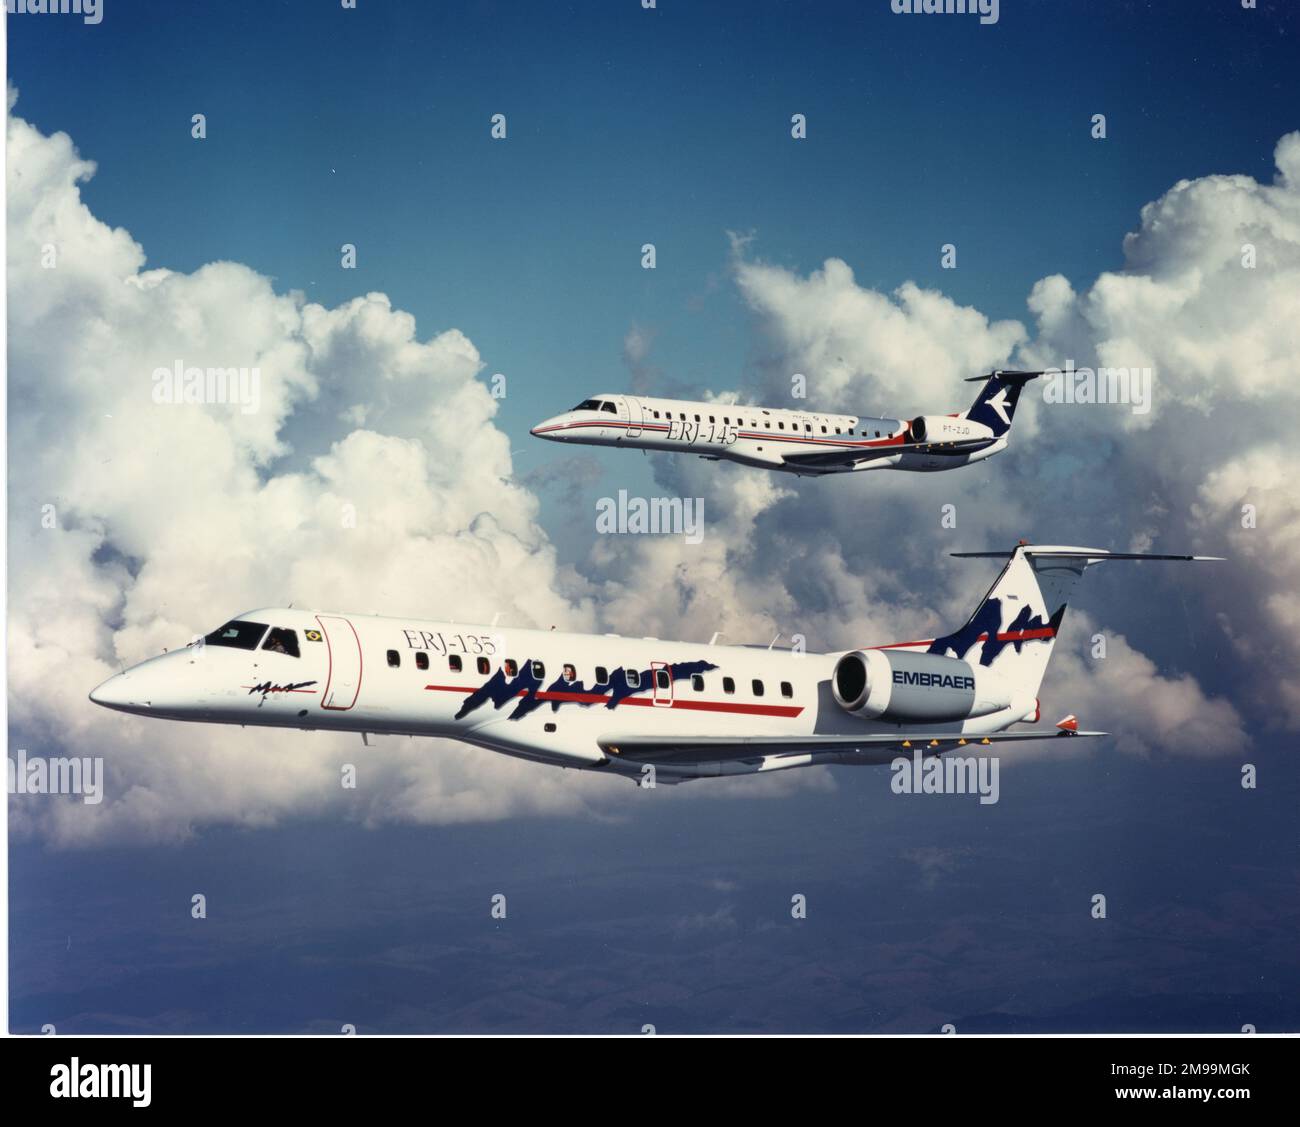 Embraer ERJ-135 and ERJ-145, in-flight, side-on, nose left. Embraer S.A. is a Brazilian aerospace conglomerate that produces commercial, military, executive and agricultural aircraft and provides aeronautical services. Stock Photo